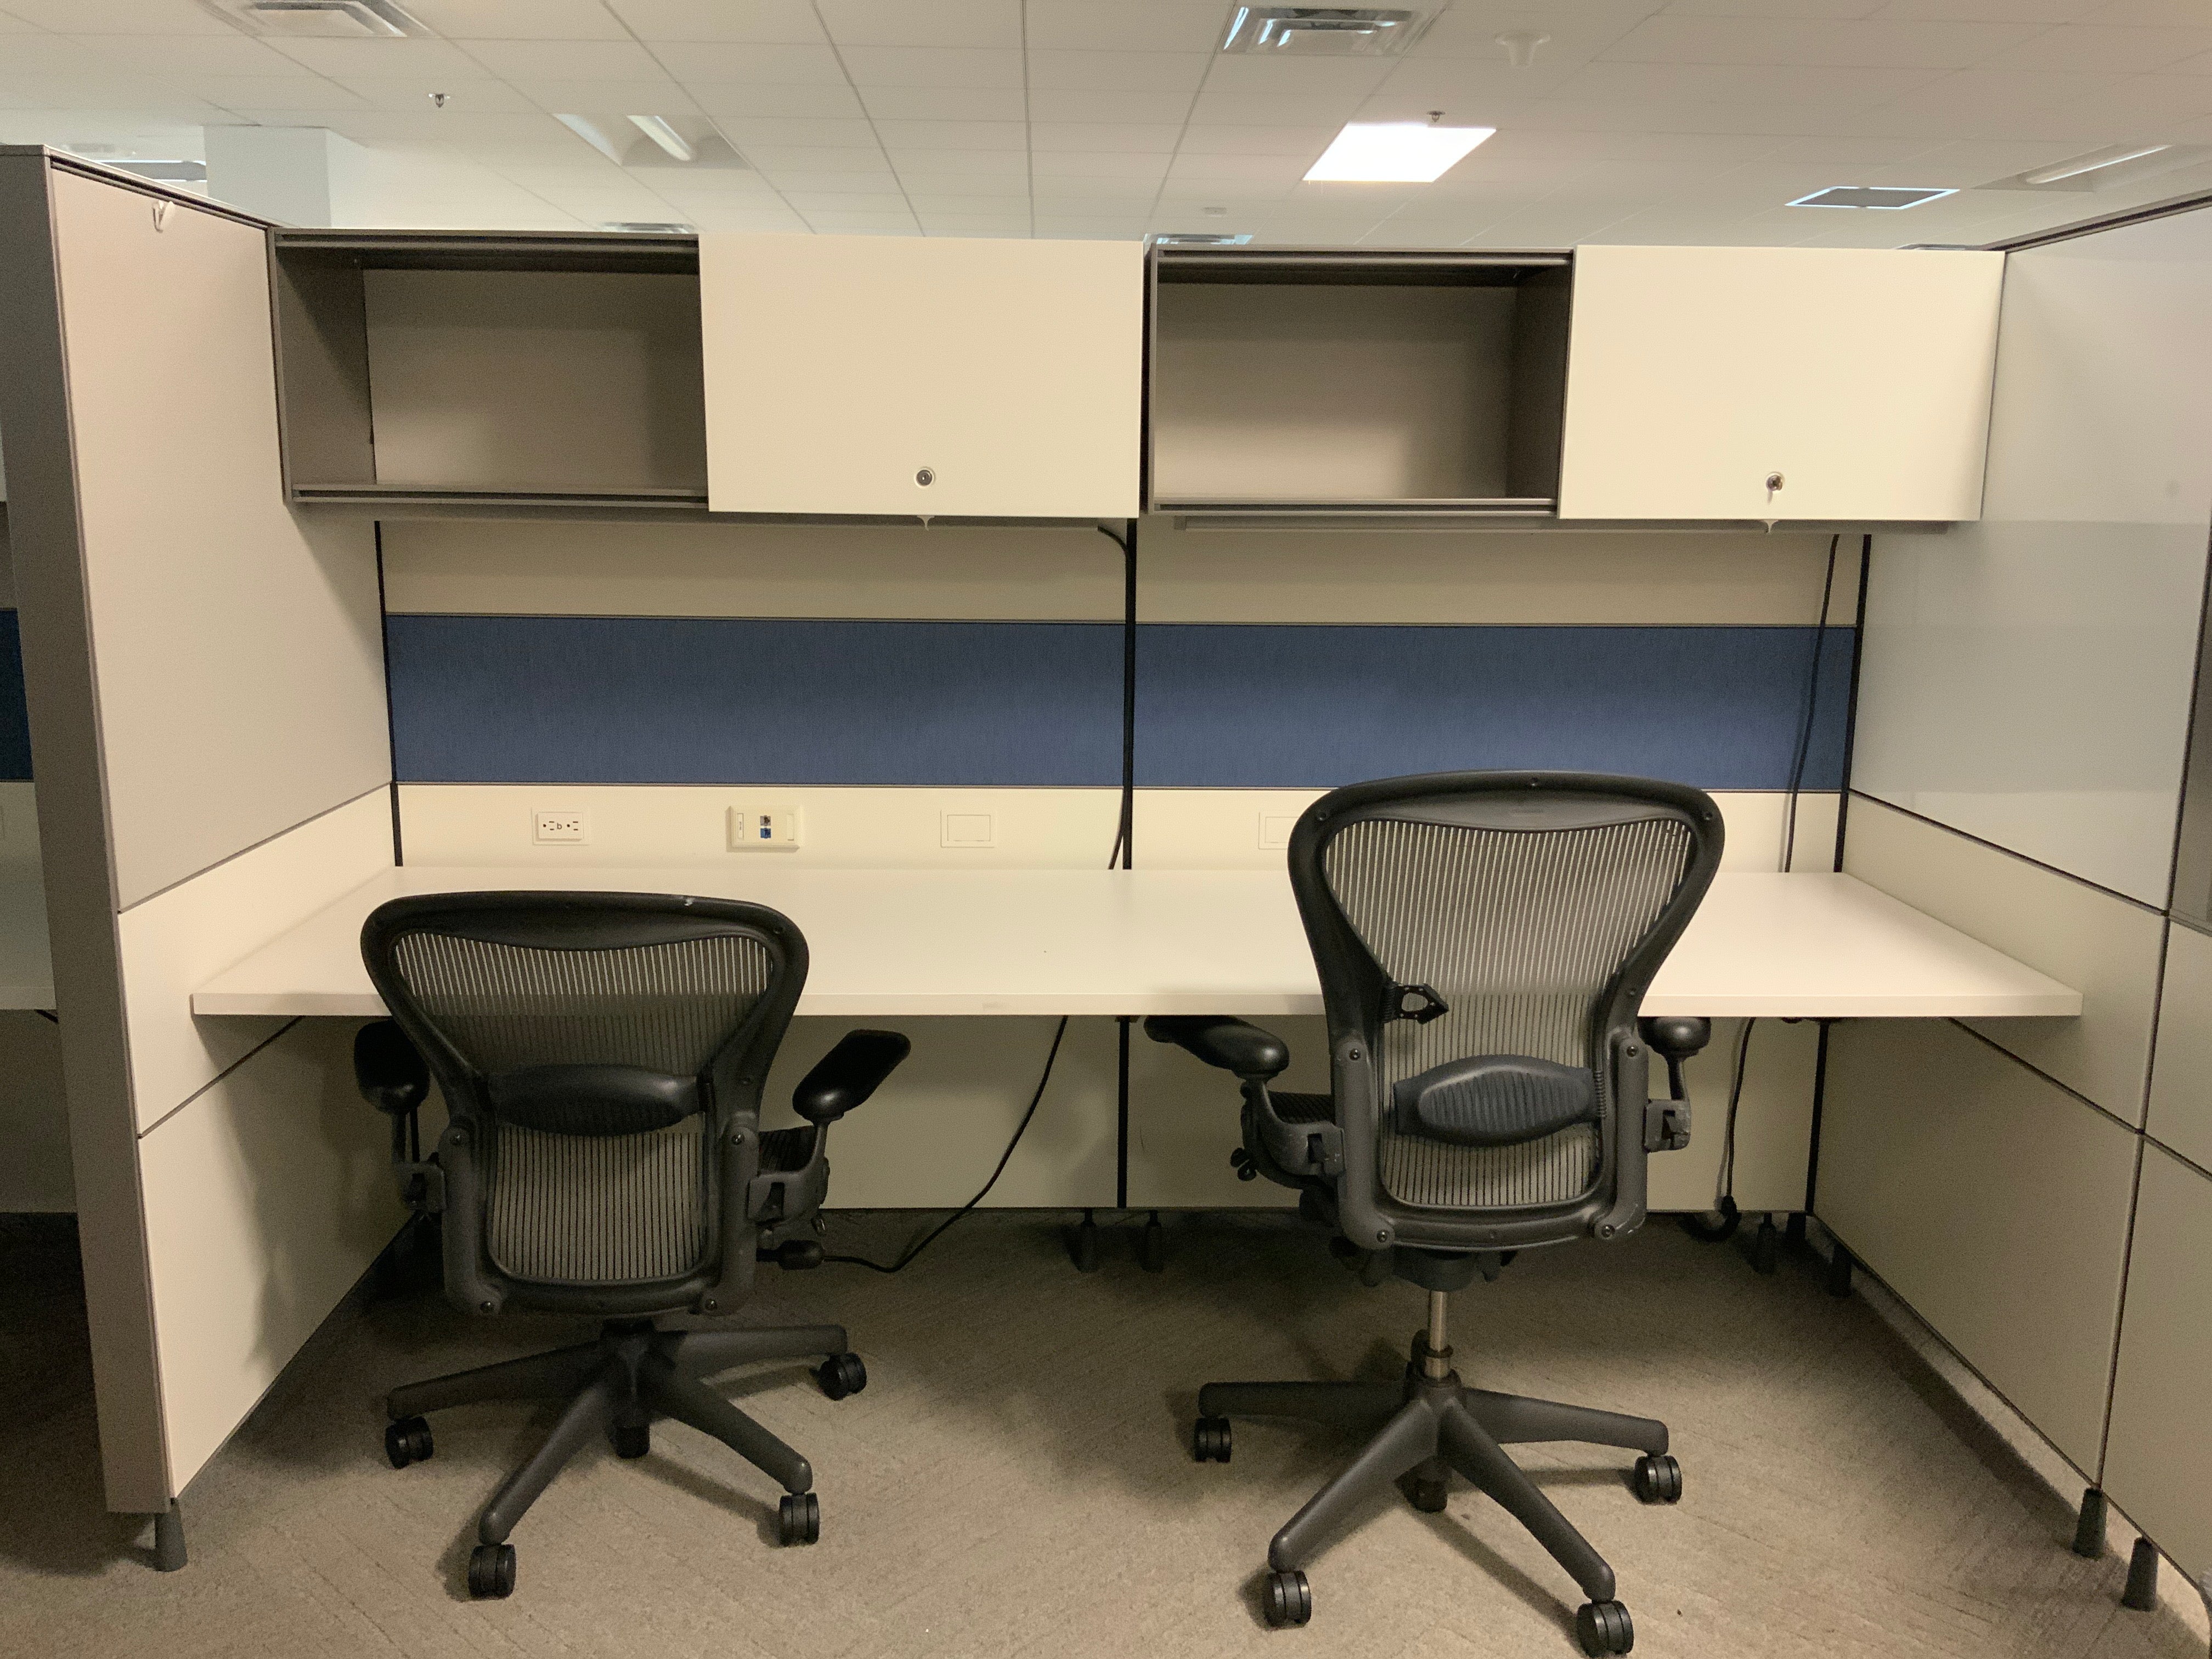 Herman Miller Canvas 6'x8' Straight Workstation - Preowned - FOB Vernon Hills, IL (Min Purchase Qty 12 Stations)